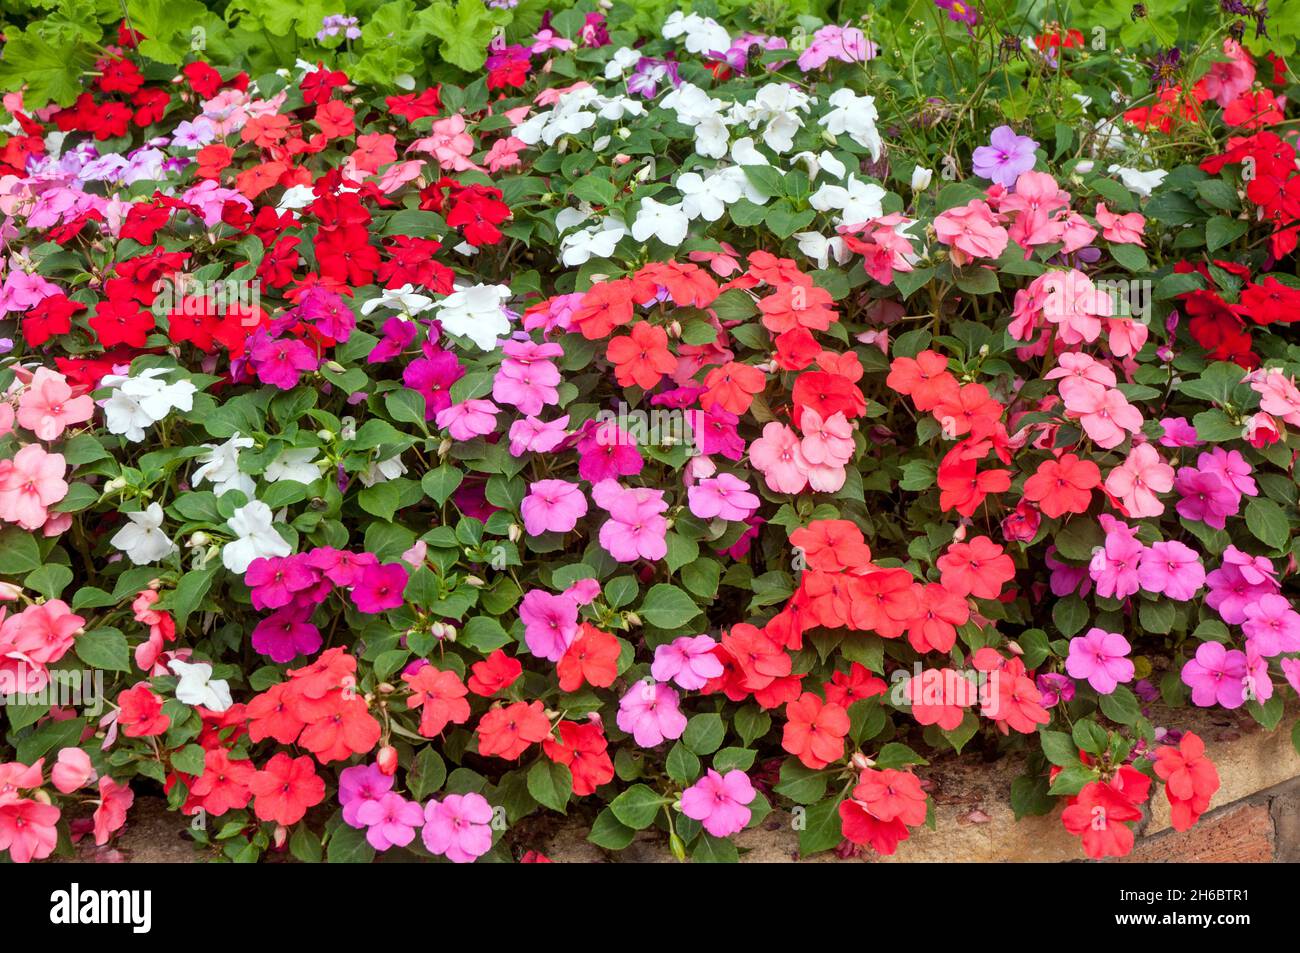 Impatiens Busy Lizzie an annual in mixed colours of red pink salmon orange and white growing in a flower bed in summer. Stock Photo